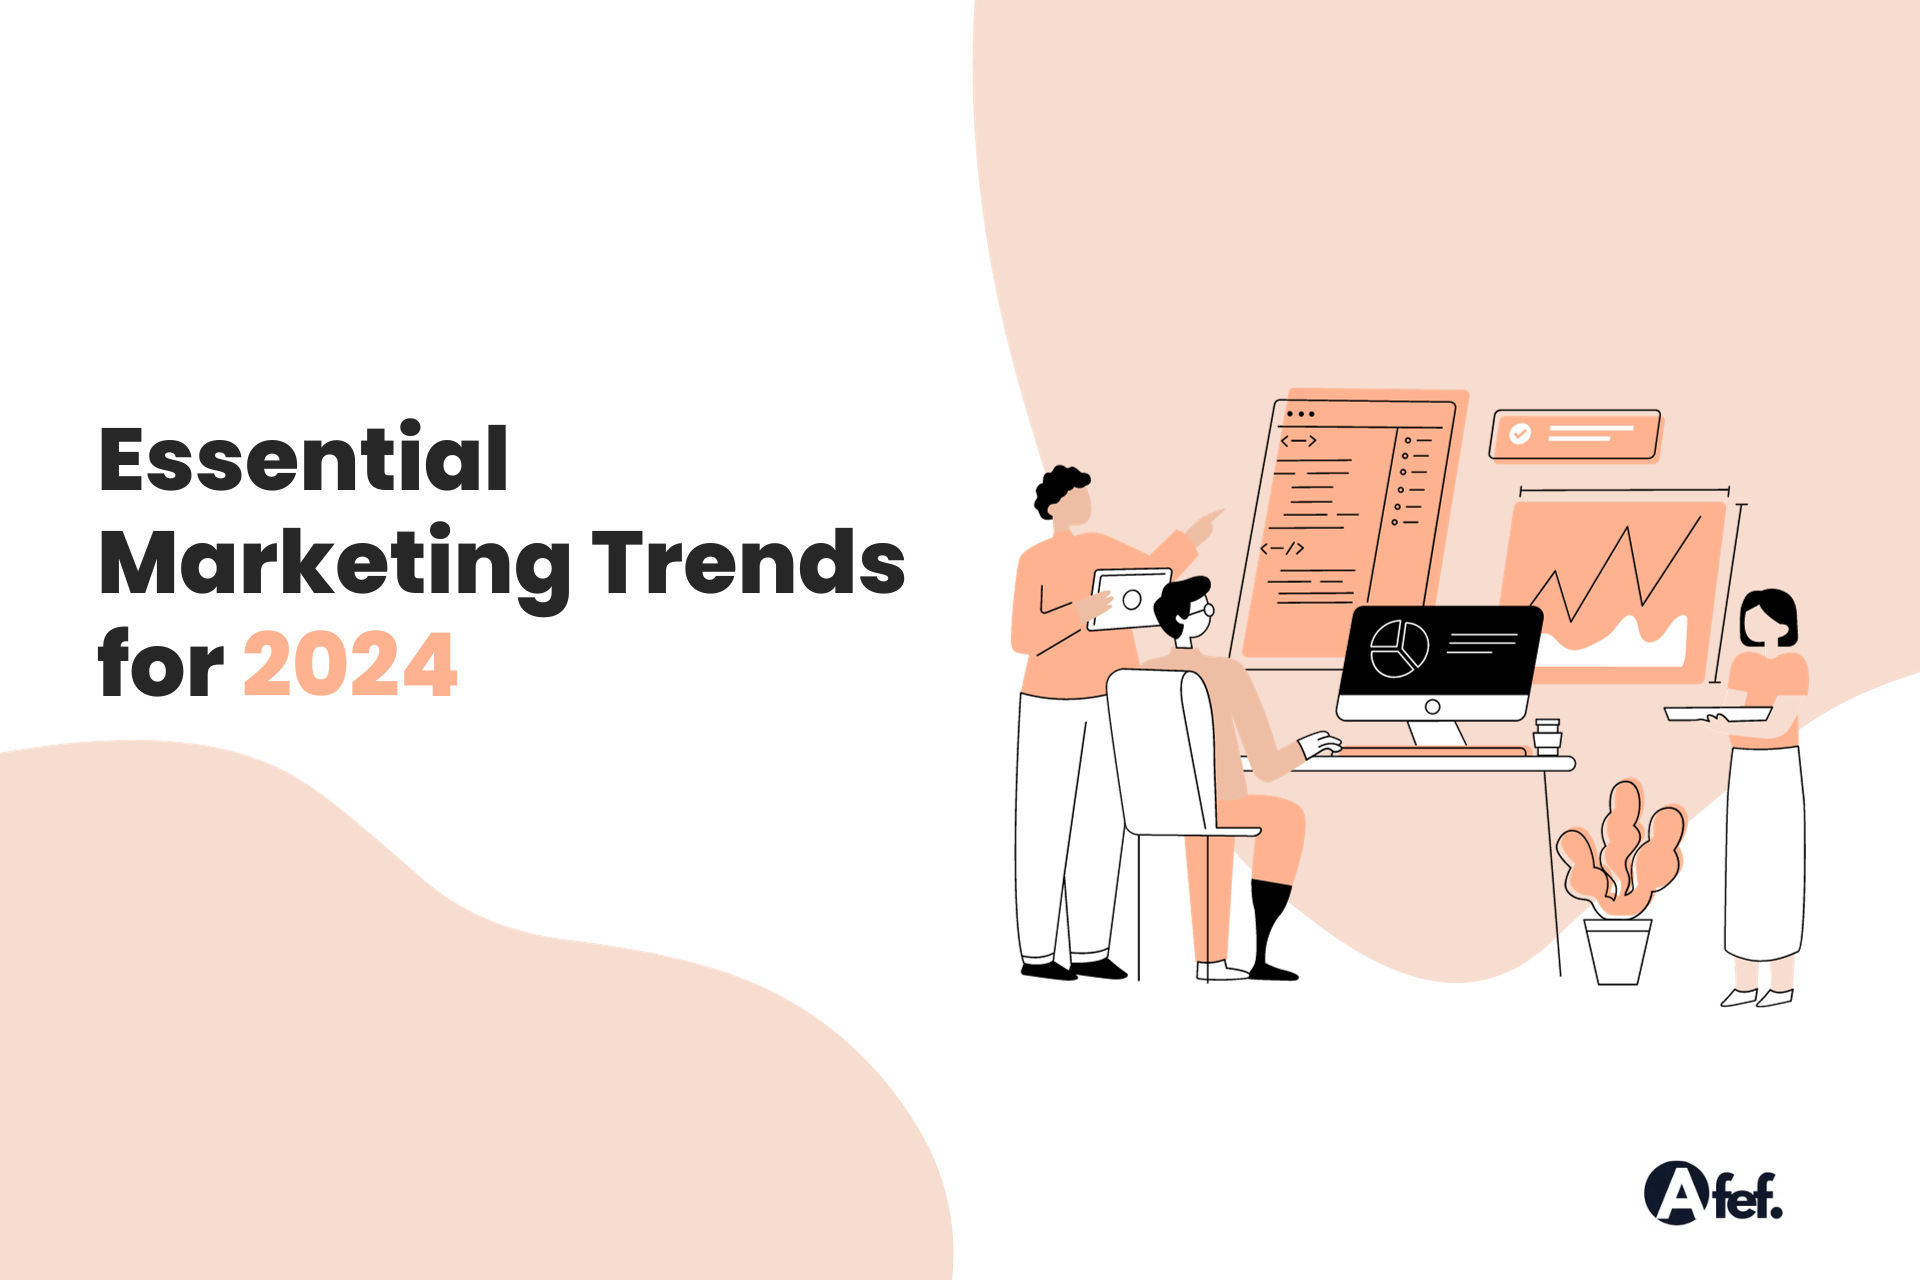 Essential Marketing Trends for 2024